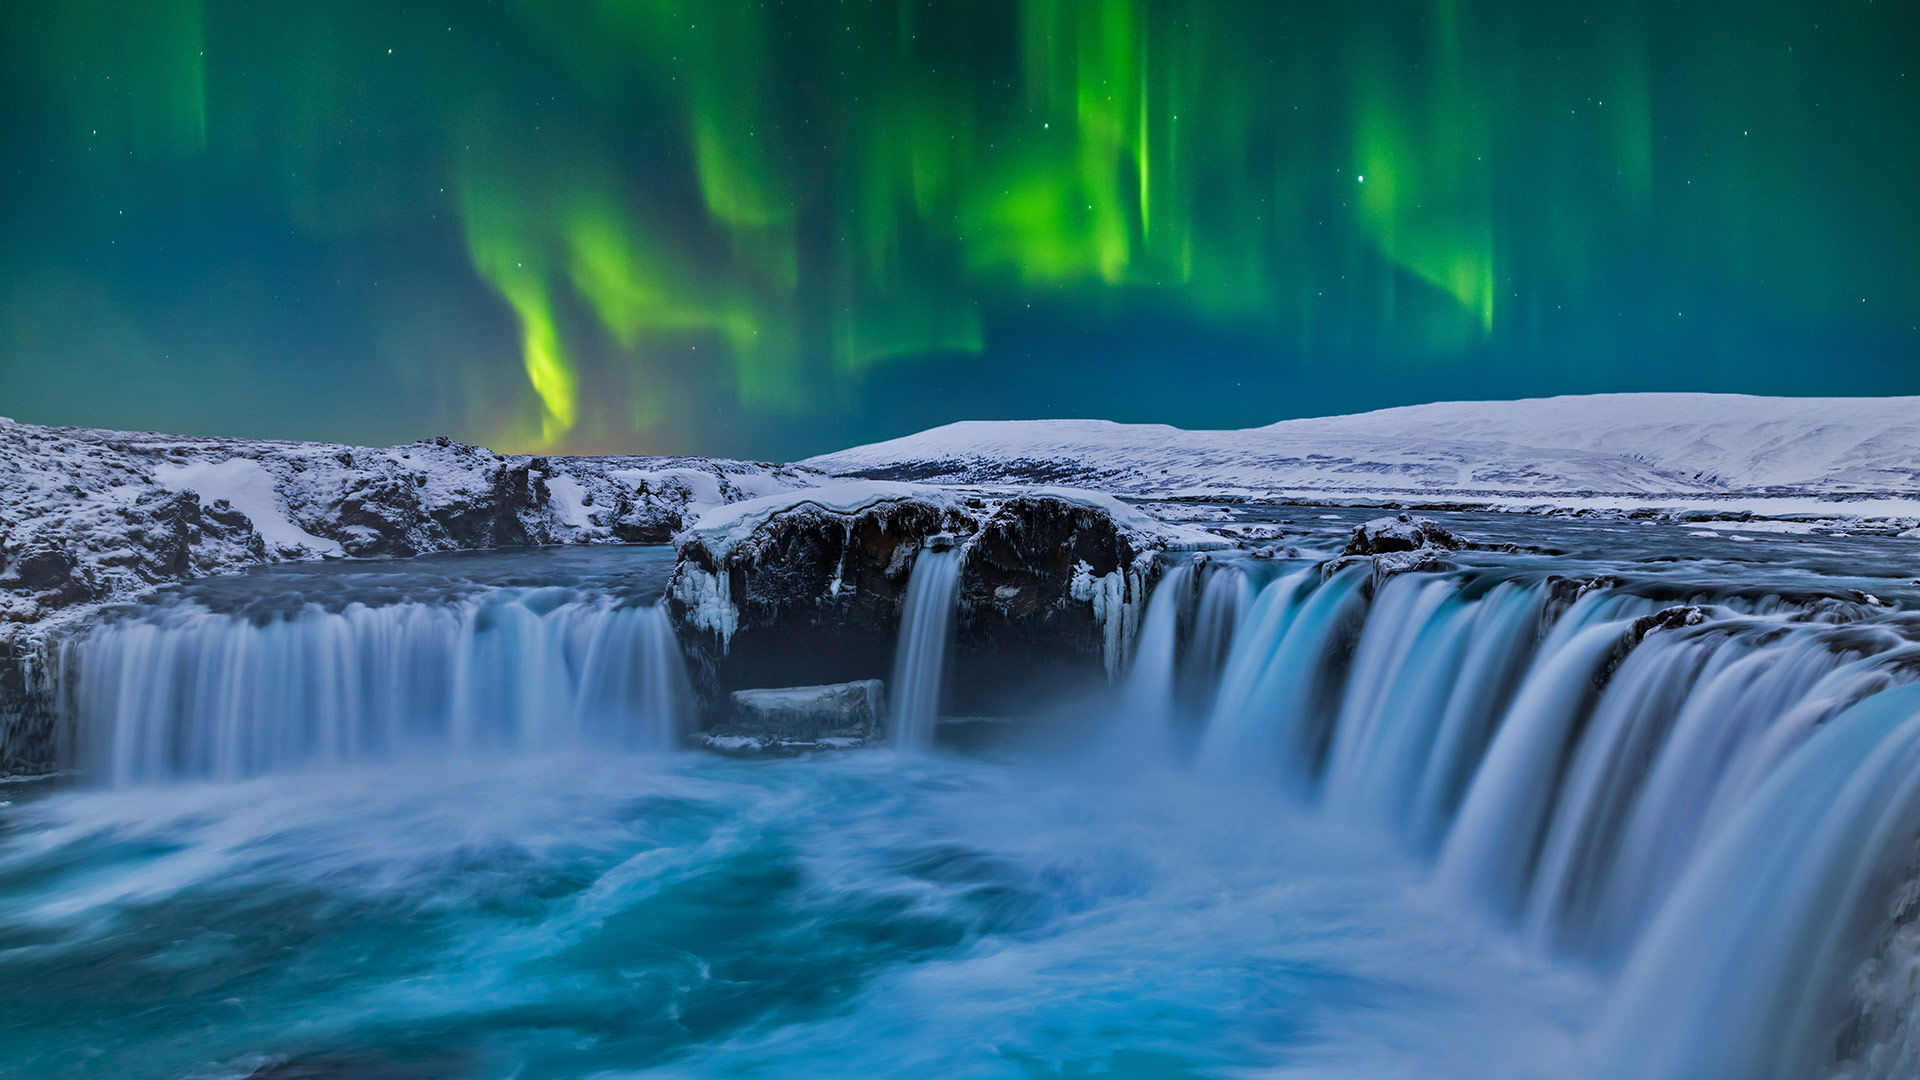 Goðafoss waterfall under the northern lights, Iceland - Anton Petrus/Getty Images)